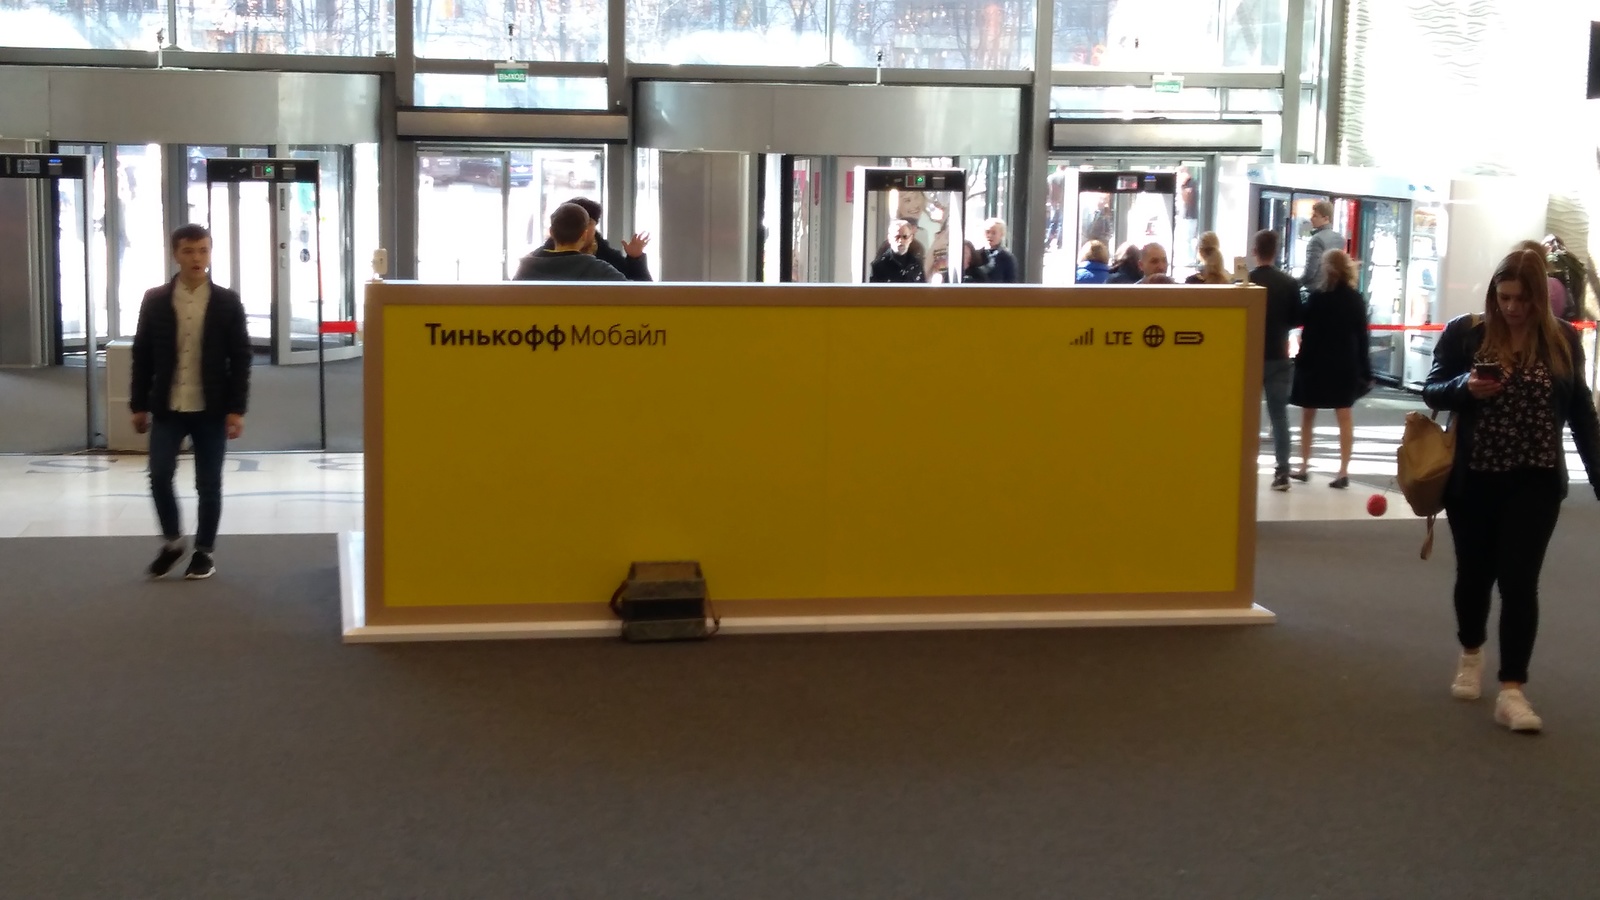 Today, in one of the Moscow shopping centers - My, Tinkoff, Tinkov, 4g, , Tinkoff Bank, Oleg Tinkov, Cellular operators